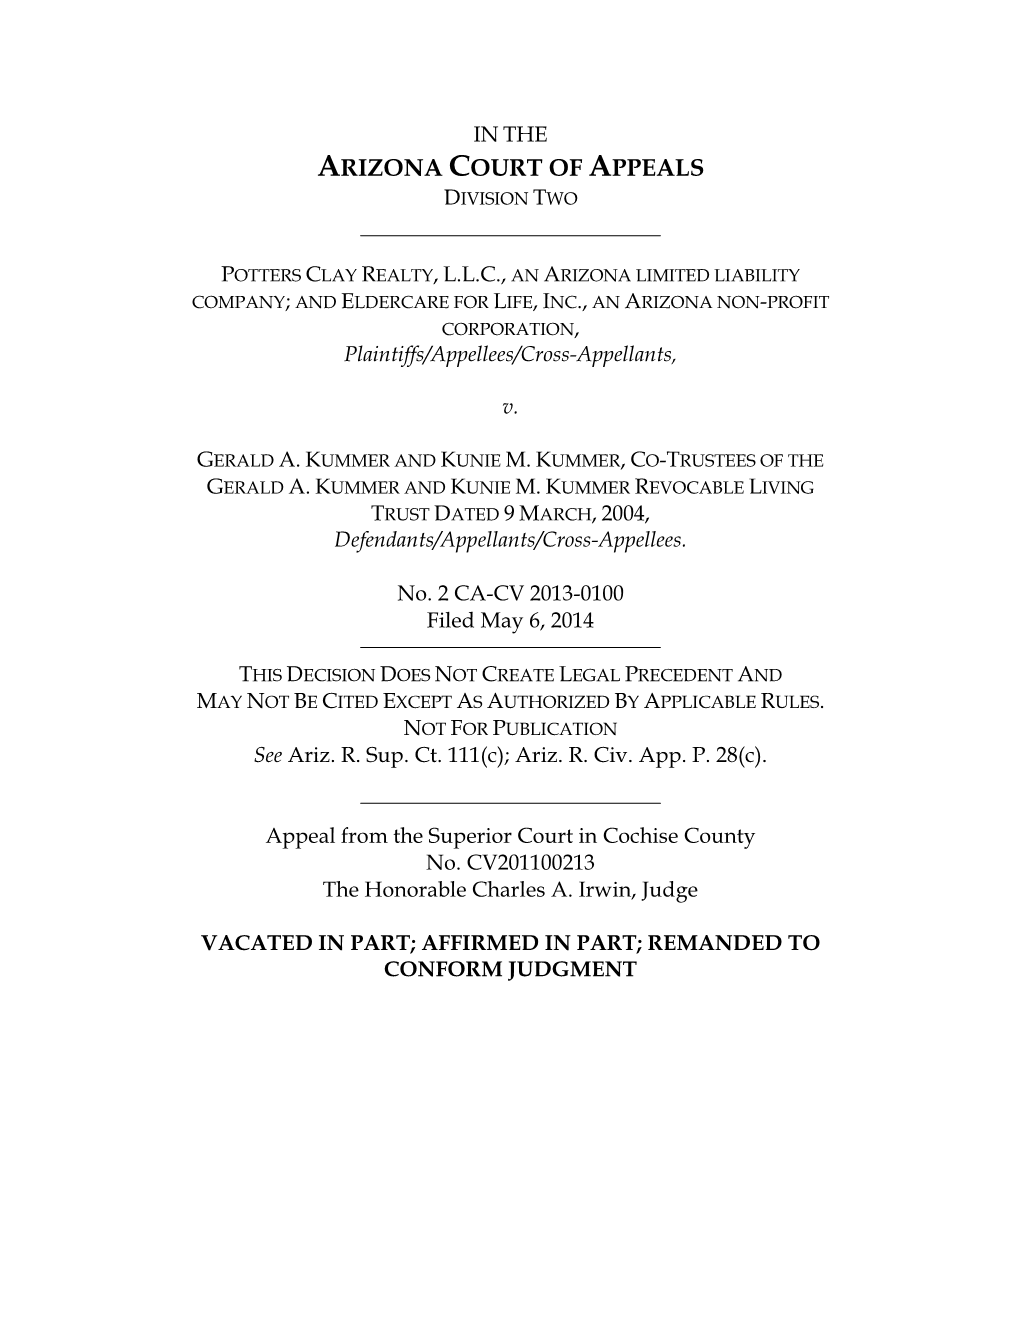 Arizona Court of Appeals Division Two